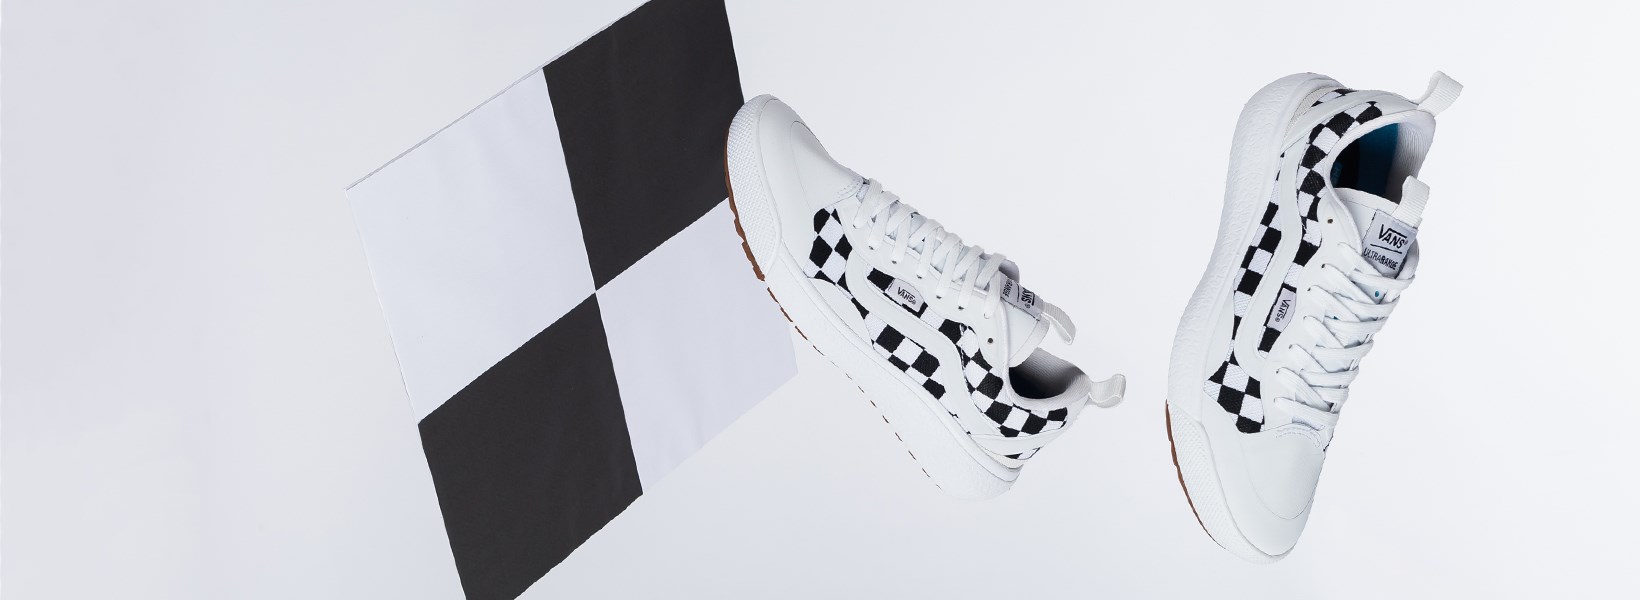 <span class="upperTitle">VANS</span><h4 class="subTitle">CHECKERBOARD DAY</h4>